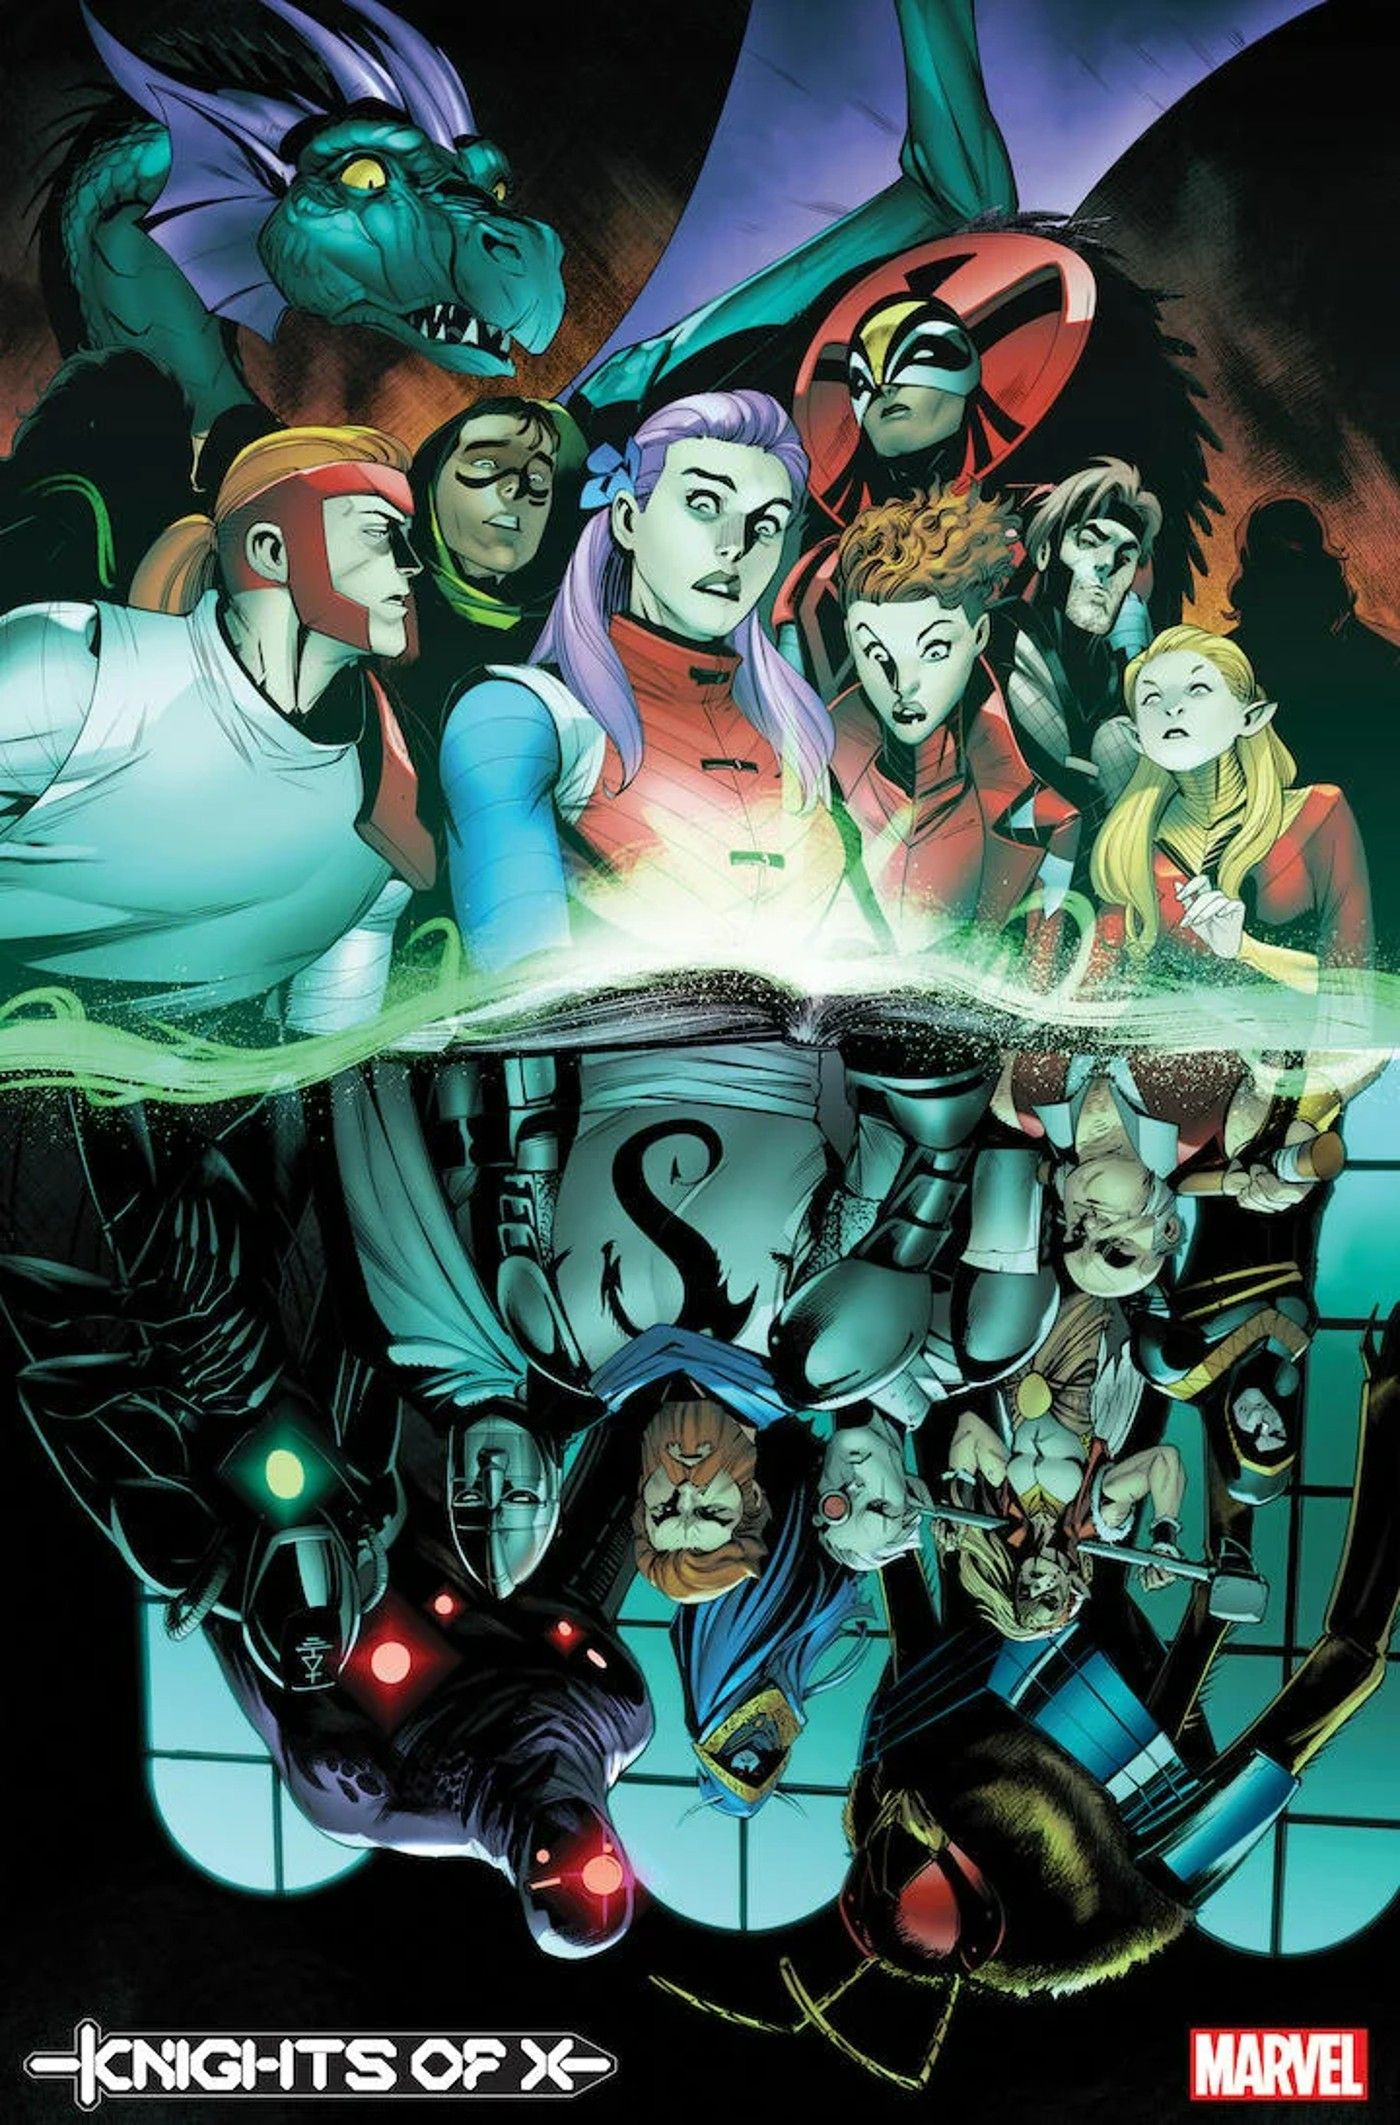 Marvel’s Lord of the Rings Team Debuts in Knights of X Preview